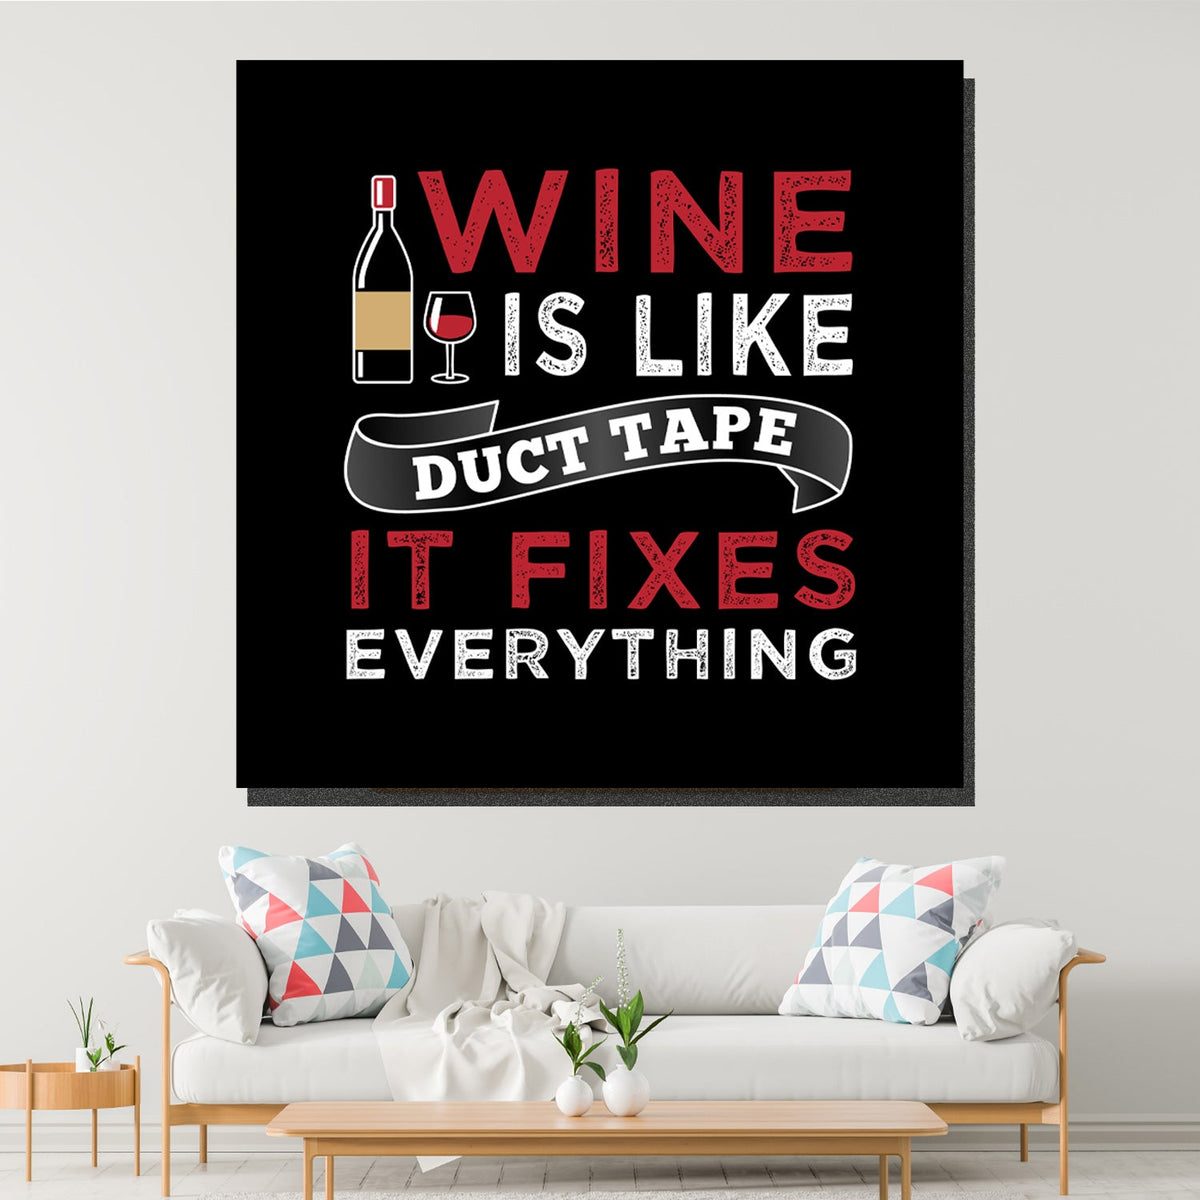 https://cdn.shopify.com/s/files/1/0387/9986/8044/products/WineFixesEverythingCanvasArtprintStretched-3.jpg